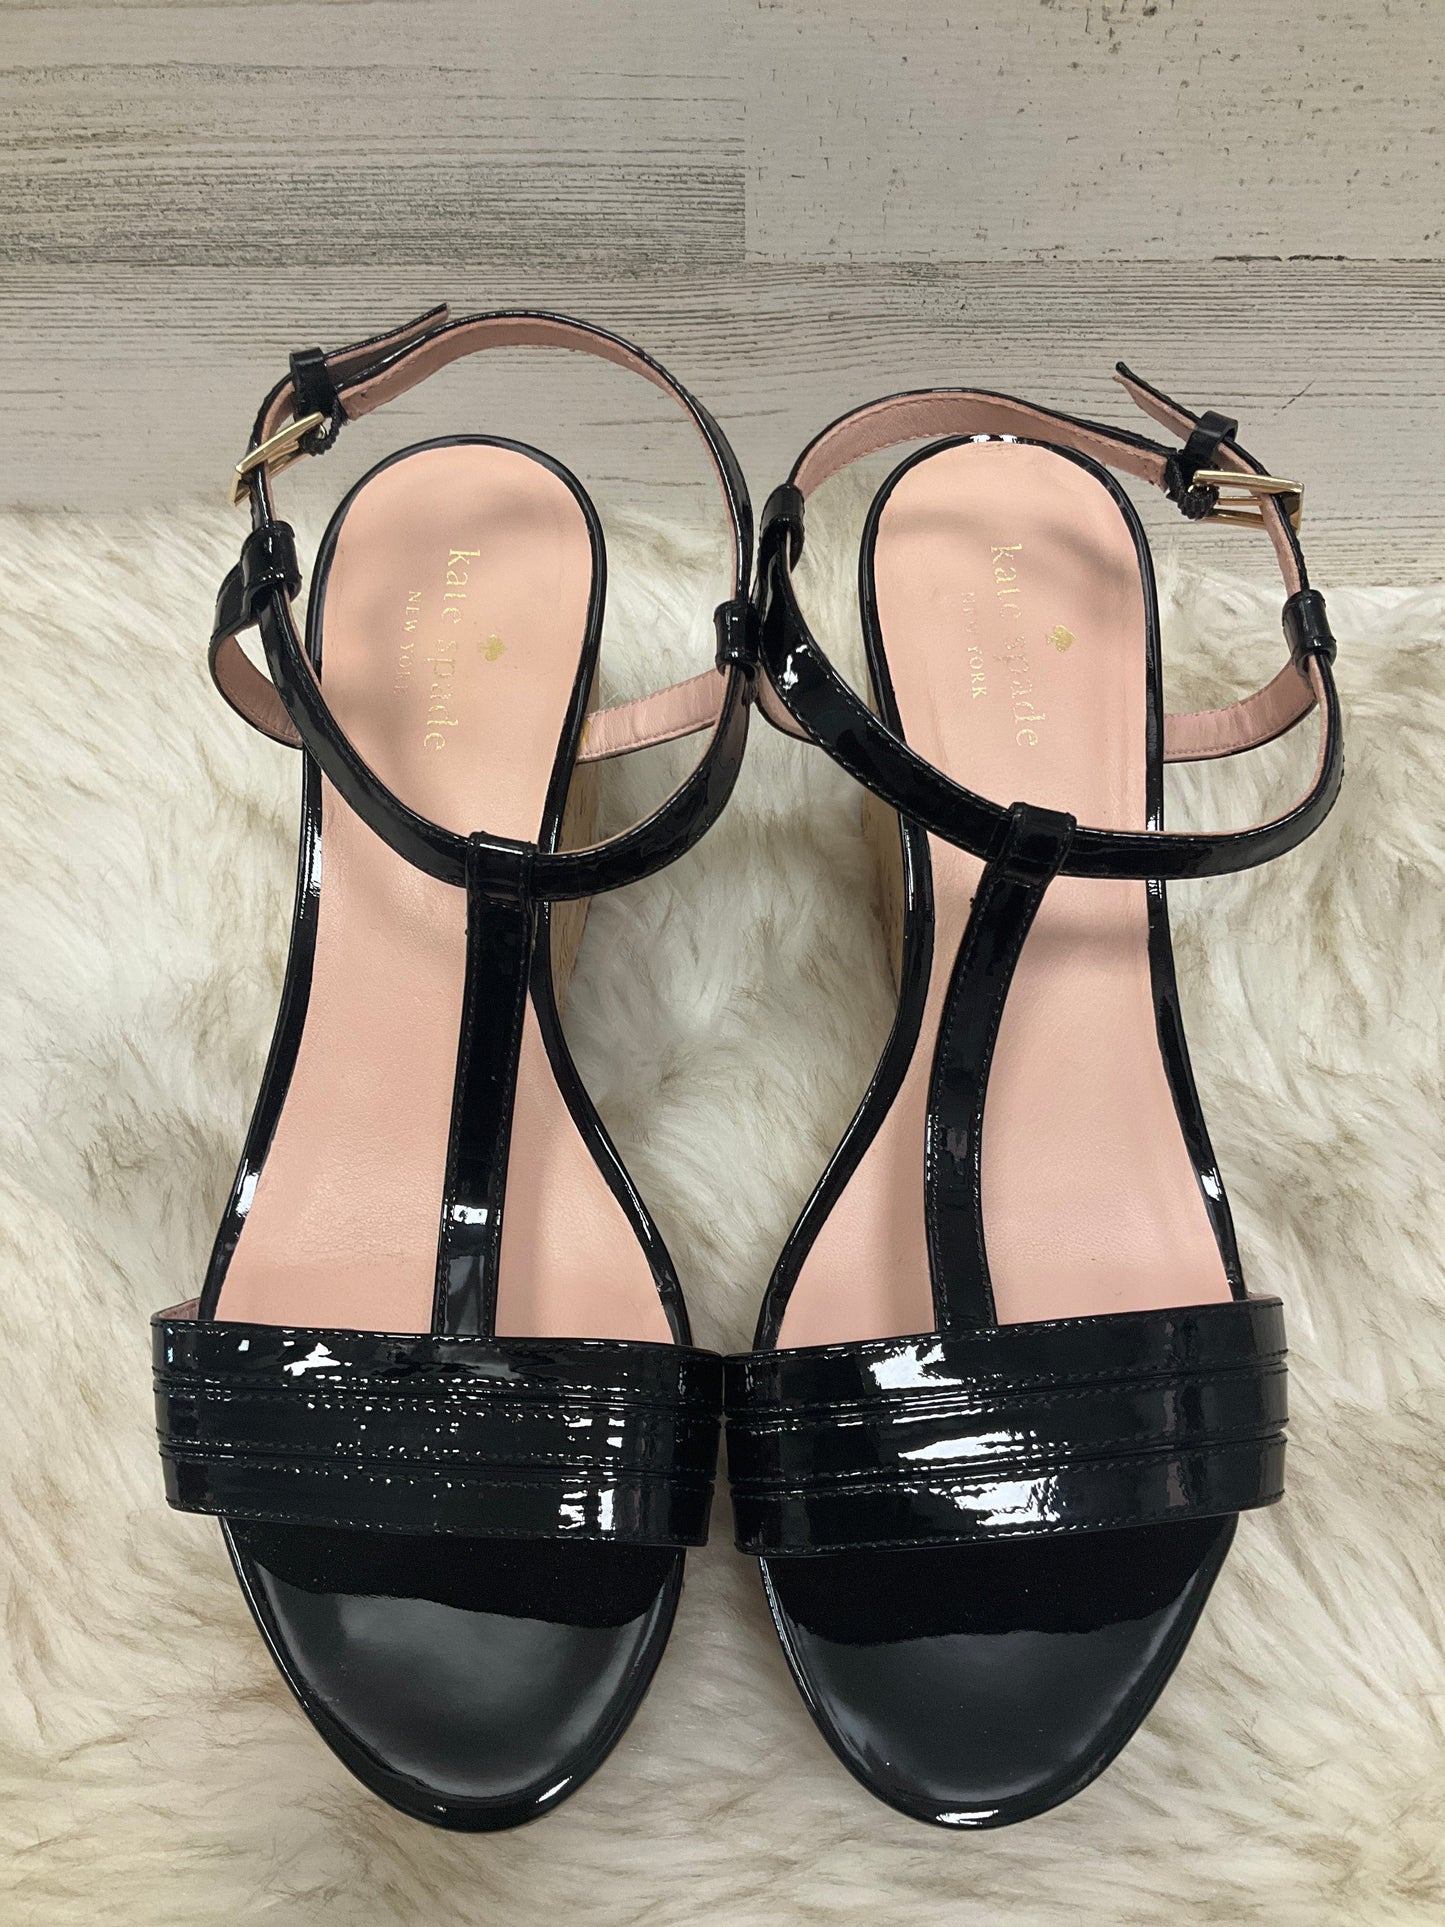 Sandals Heels Wedge By Kate Spade  Size: 9